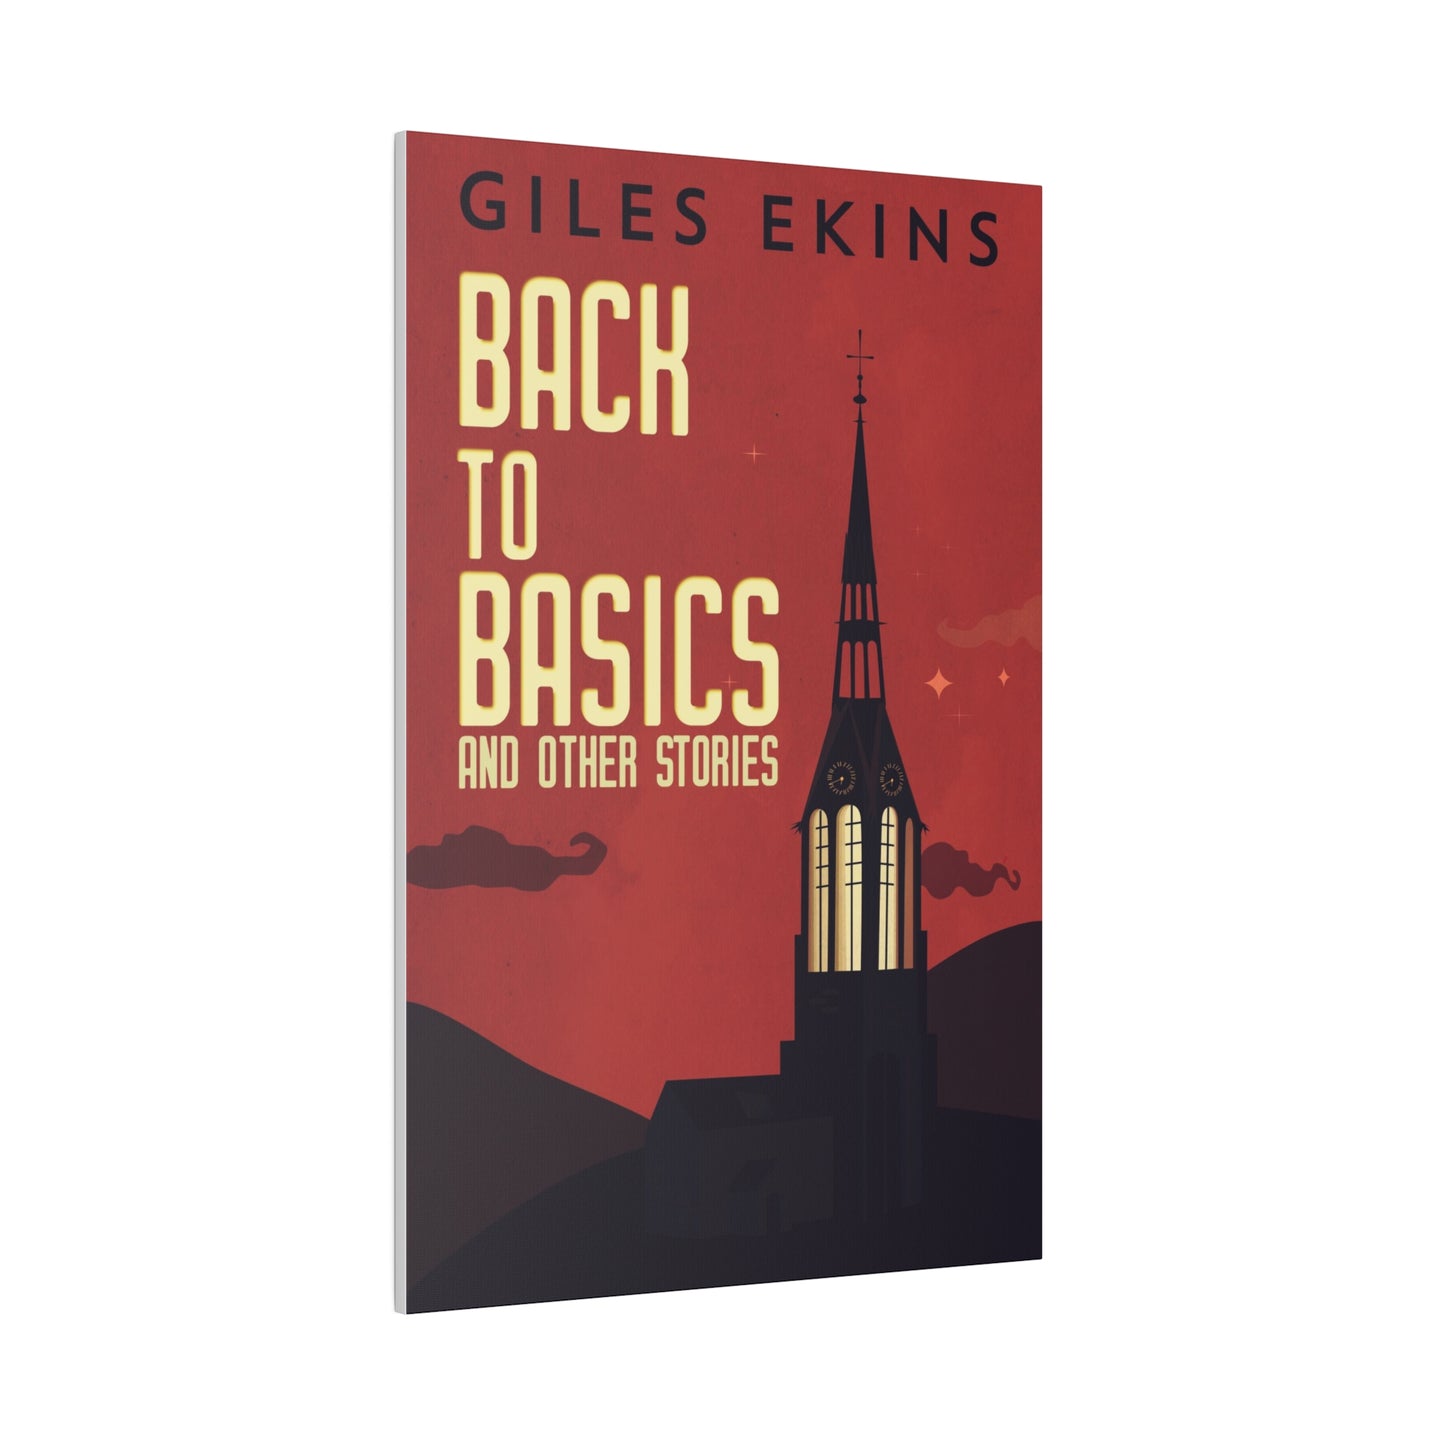 Back To Basics And Other Stories - Canvas